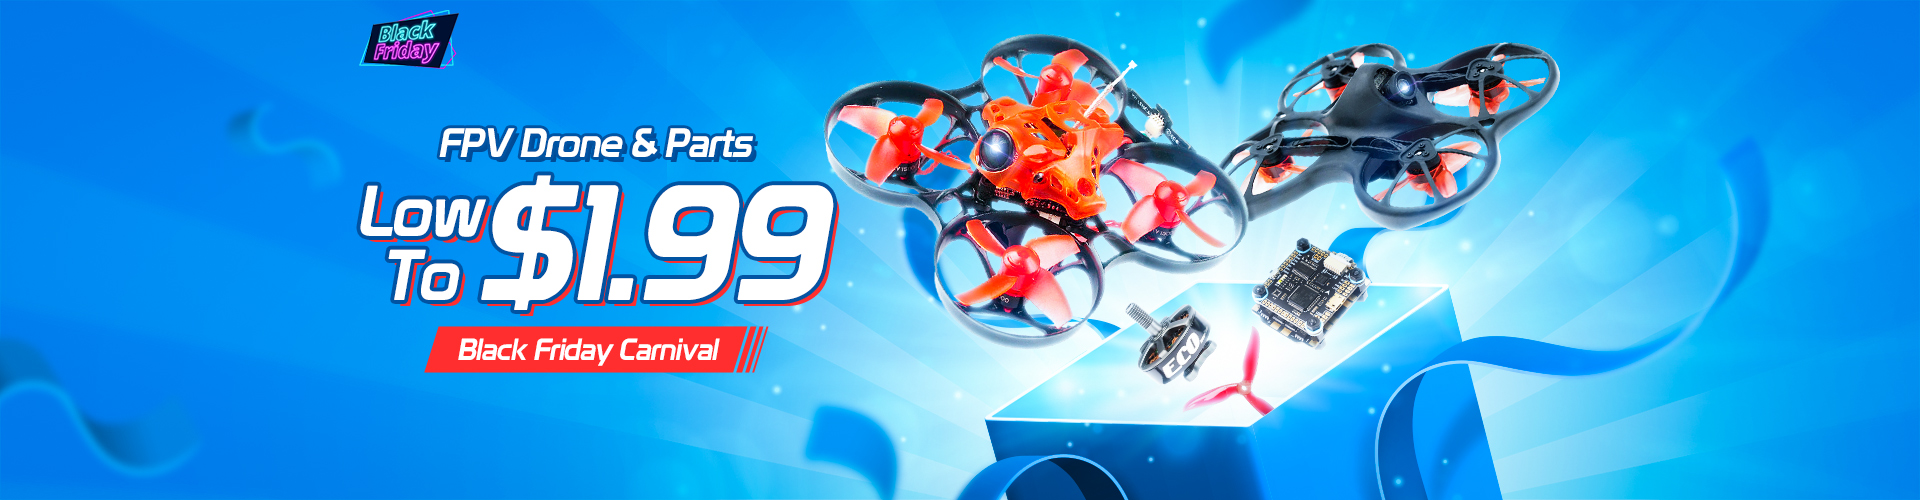 Low To $1.99 Black Friday Carnival For FPV Racing Drone & Multirotor Parts